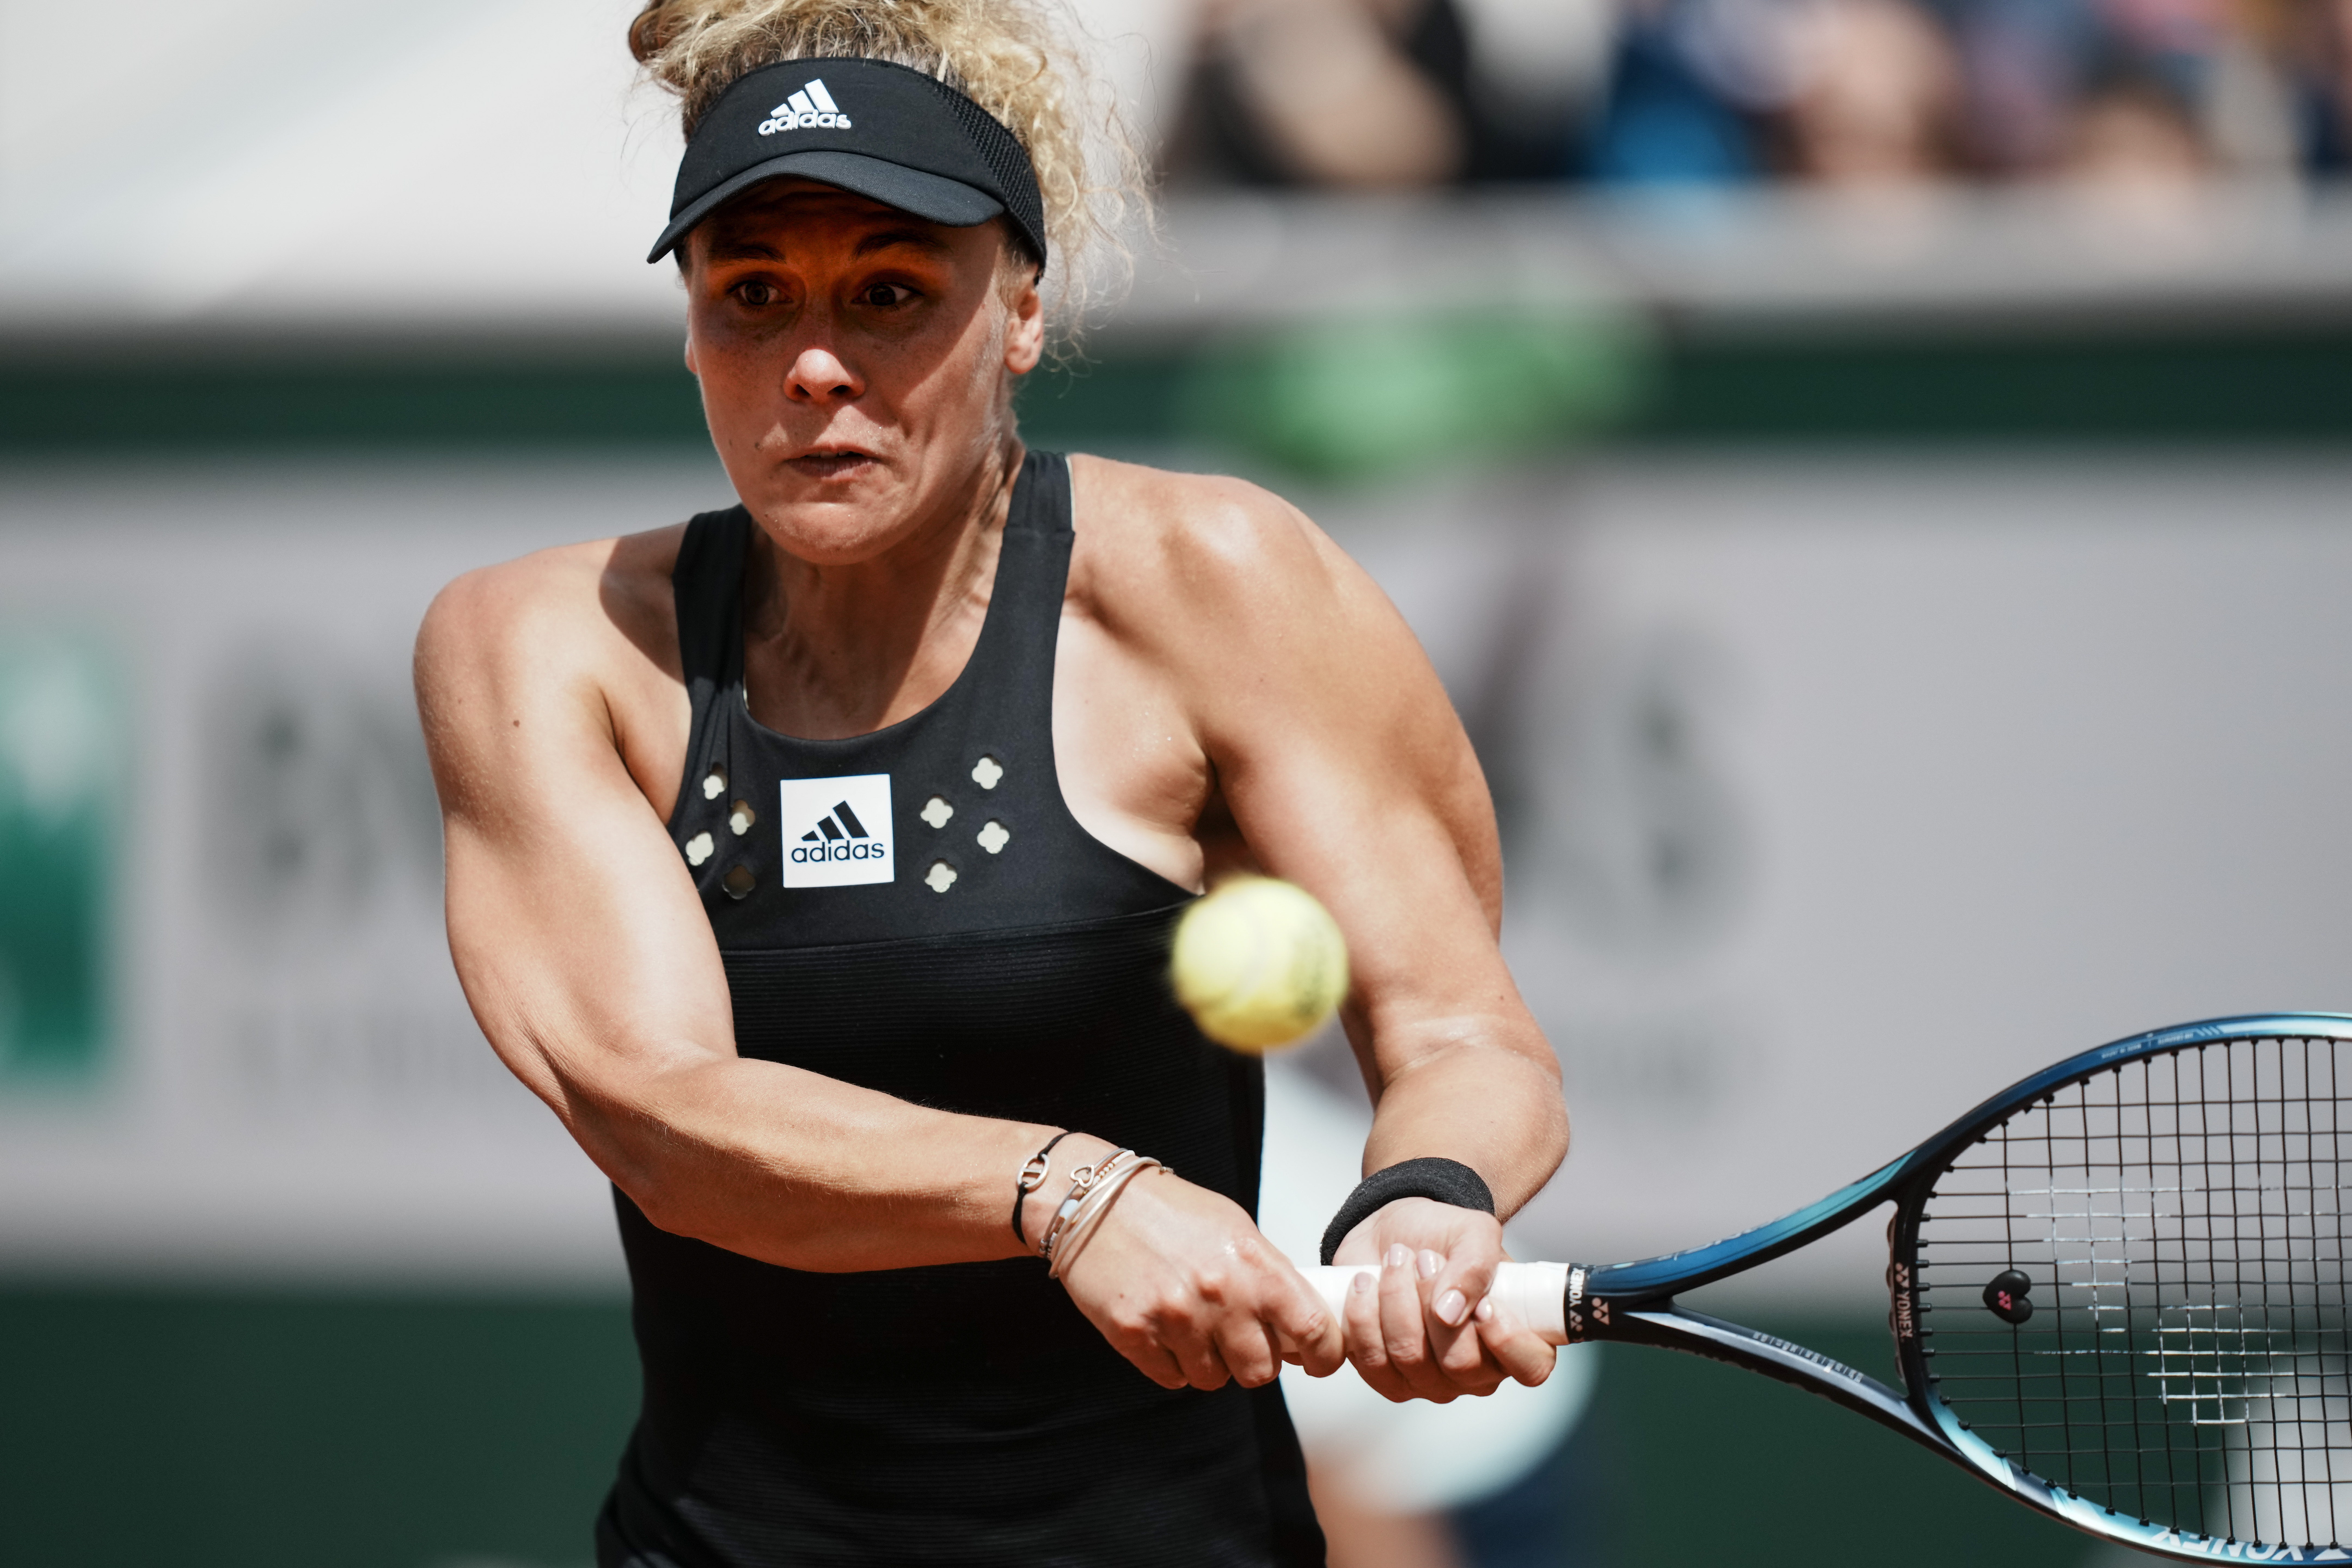 At surprise-filled French Open, tennis prodigy makes good